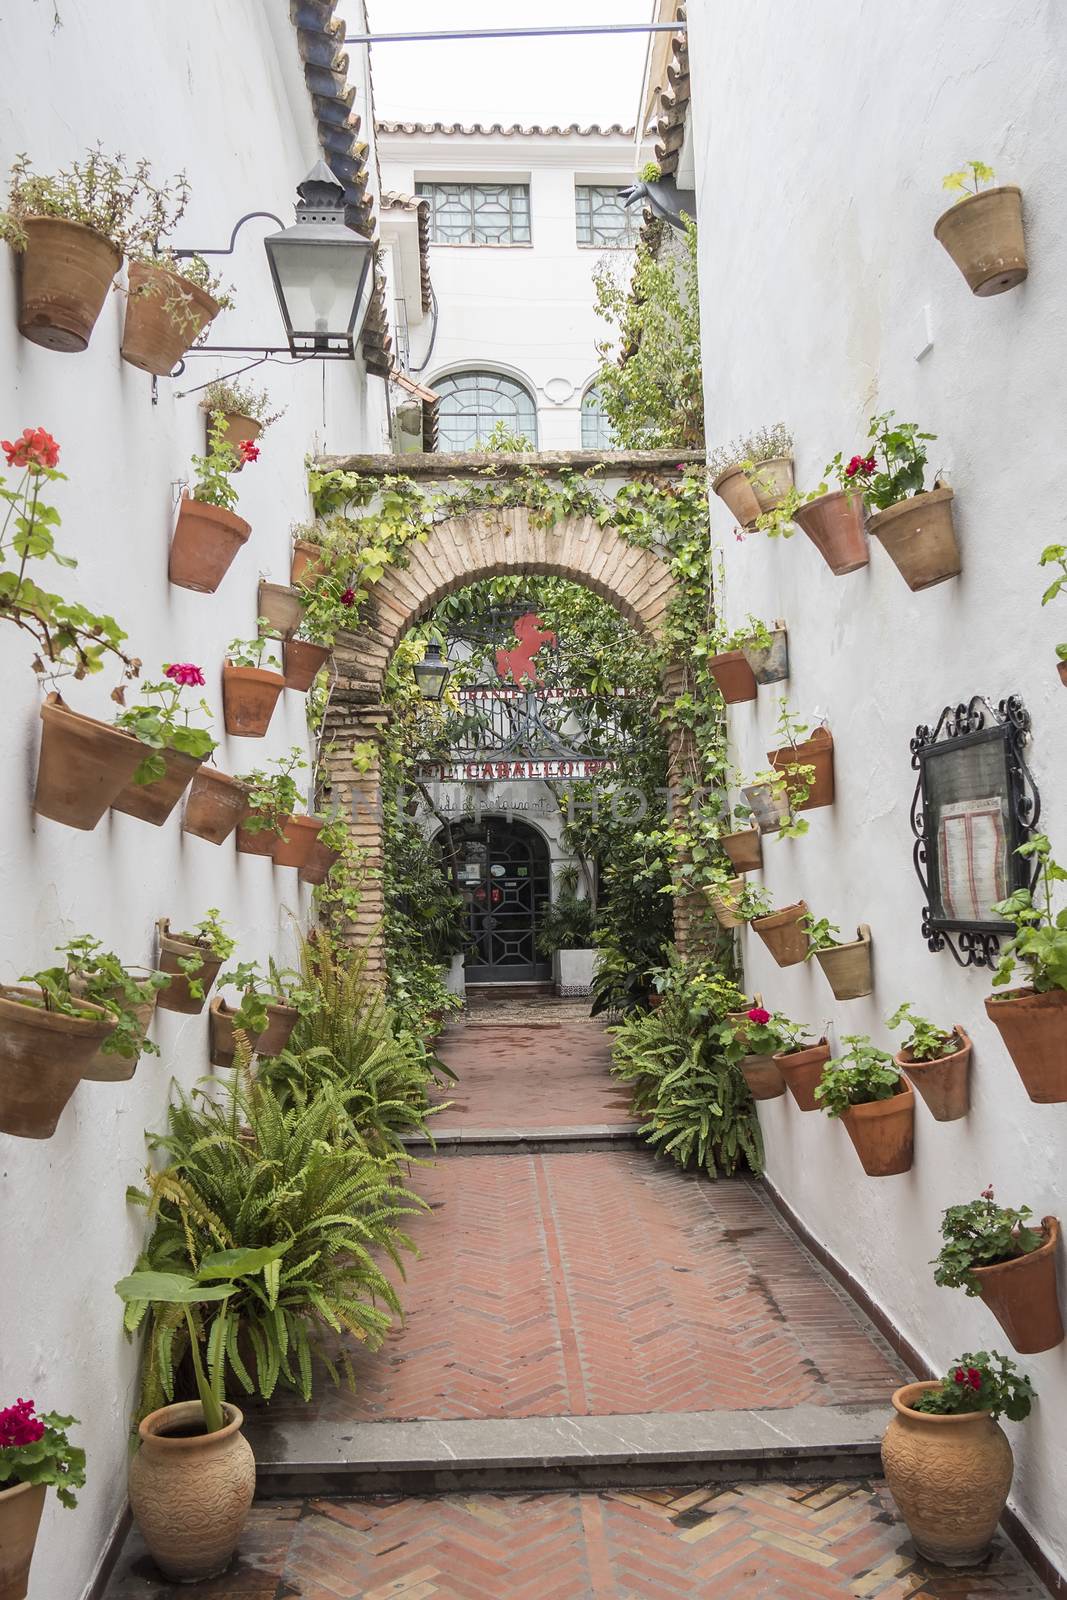 Courtyard decorated with geraniums, Cordoba, Spain by max8xam